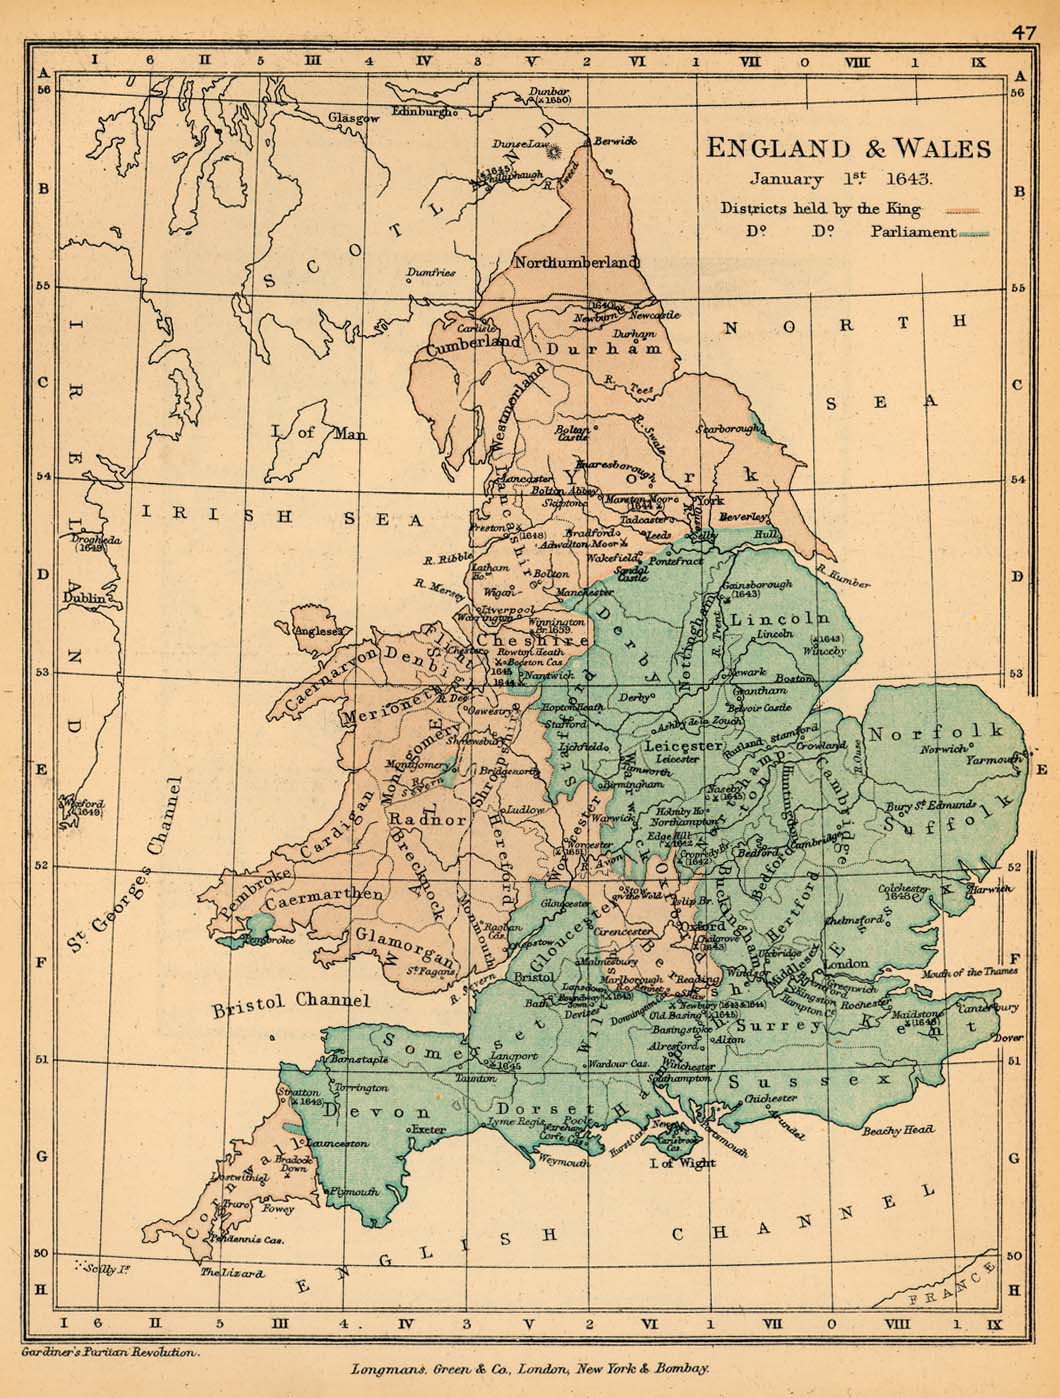 HISTORICAL MAP OF ENGLAND AND WALES